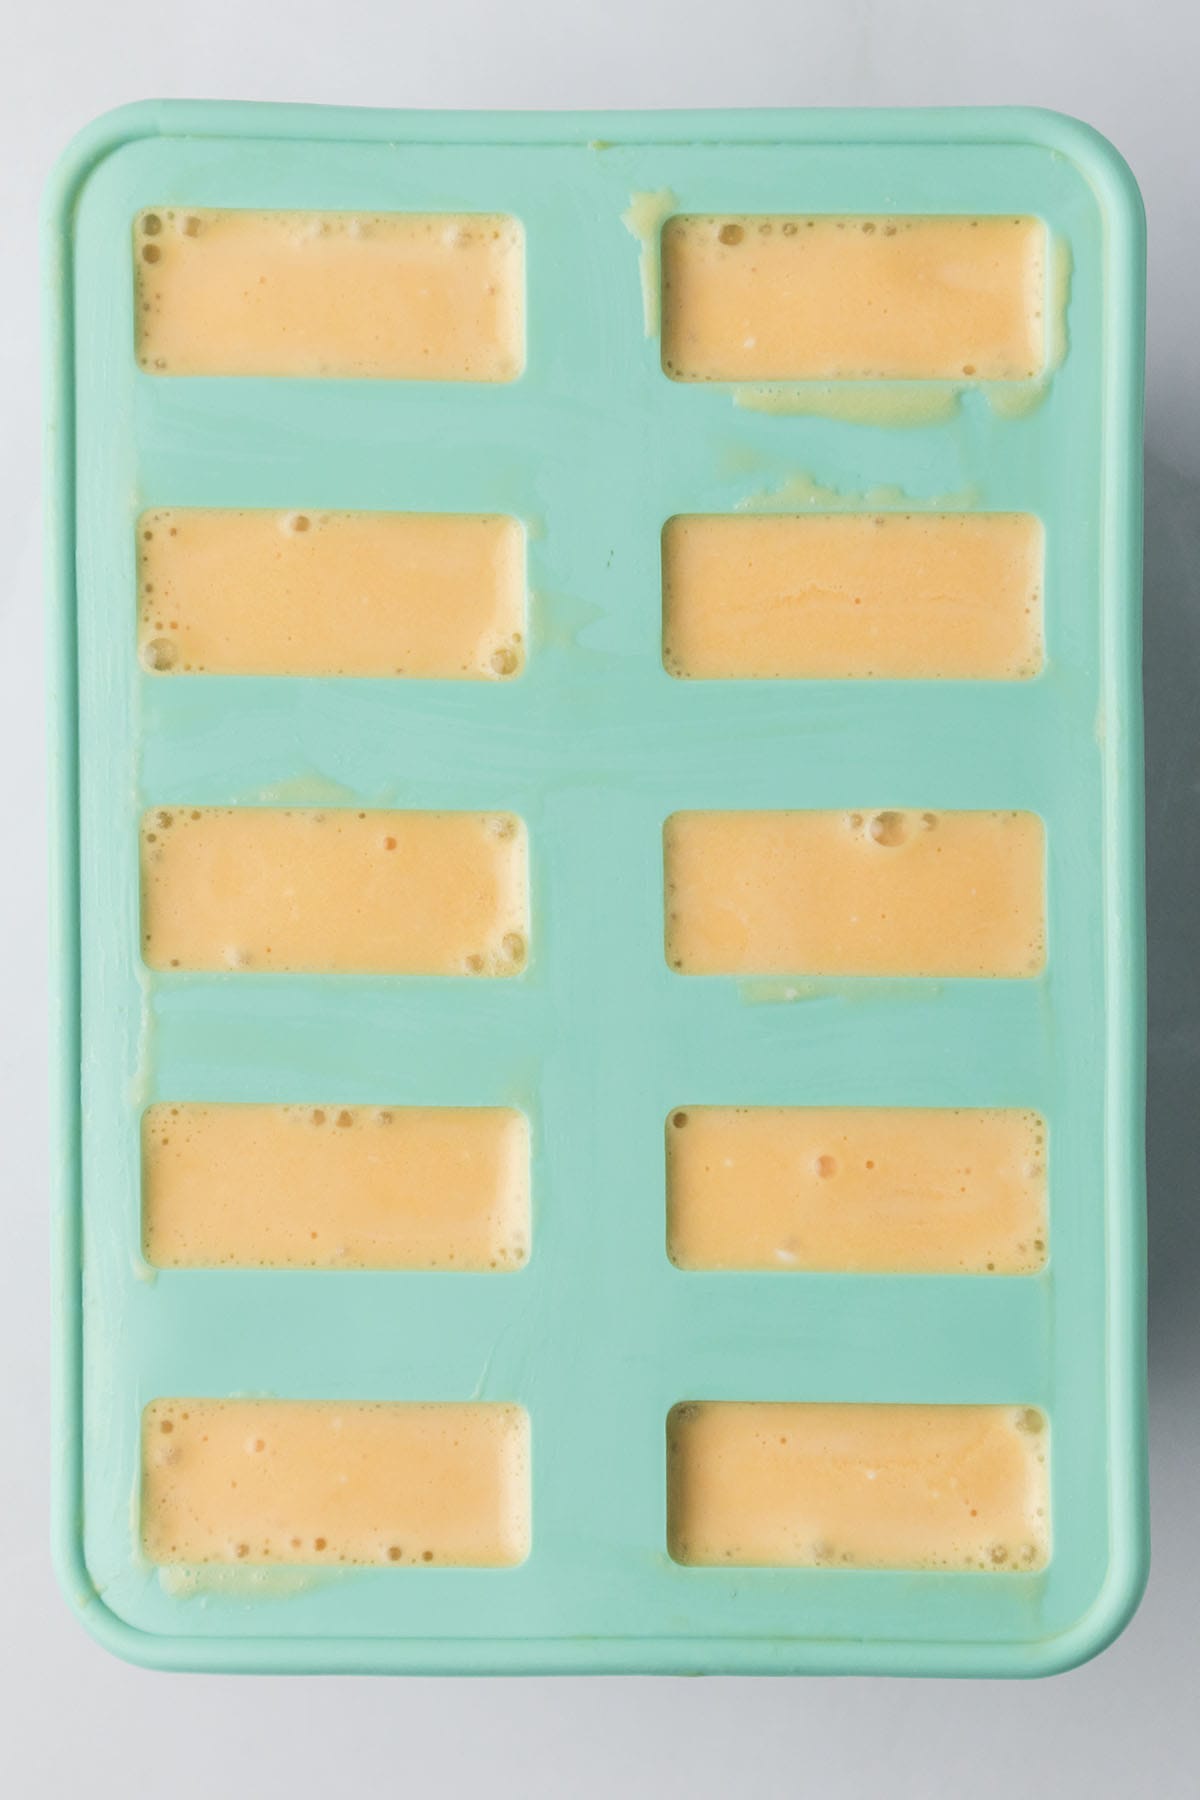 Creamsicles in popsicle mold.